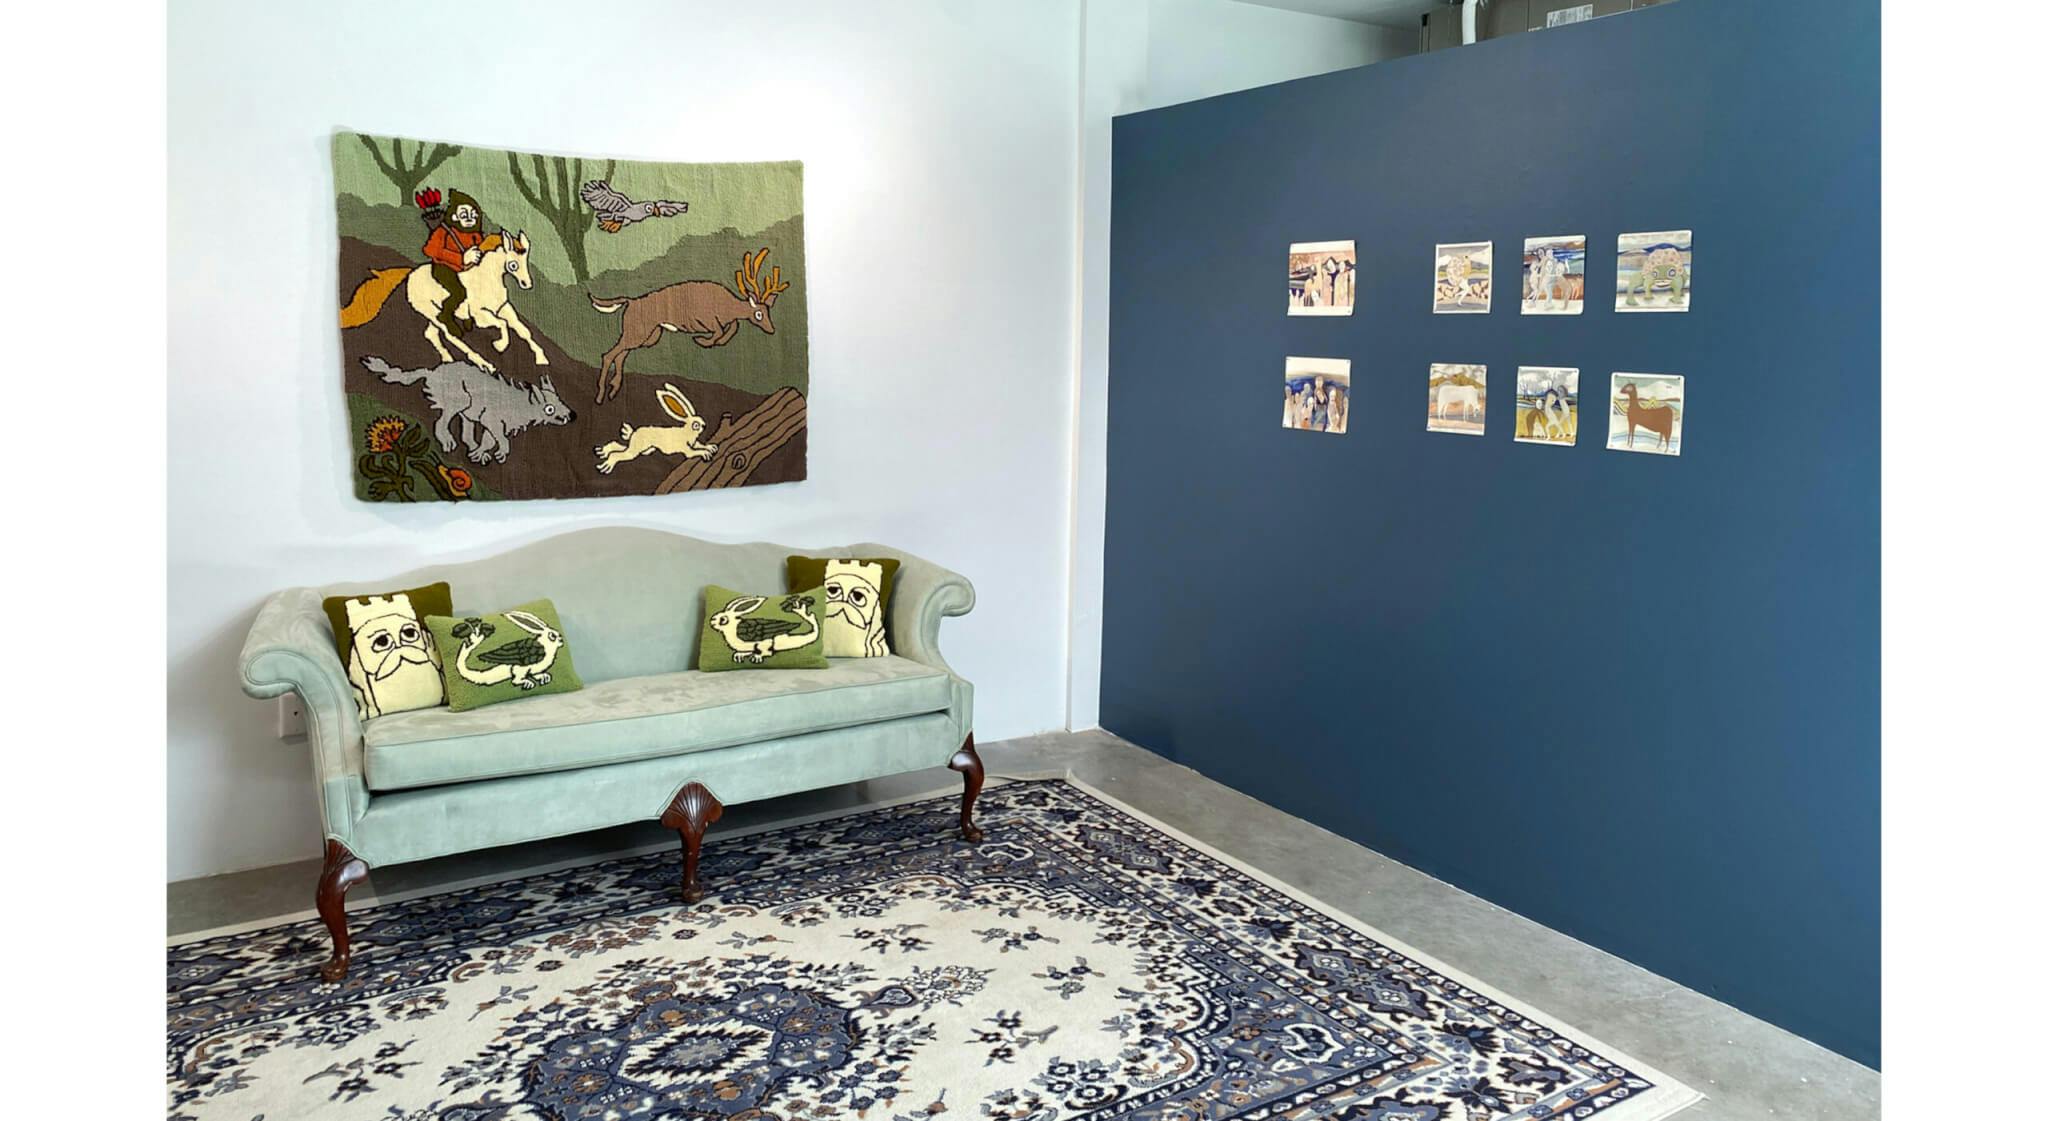 A green couch with pillows stands beneath an artwork that features fairytale-like characters.